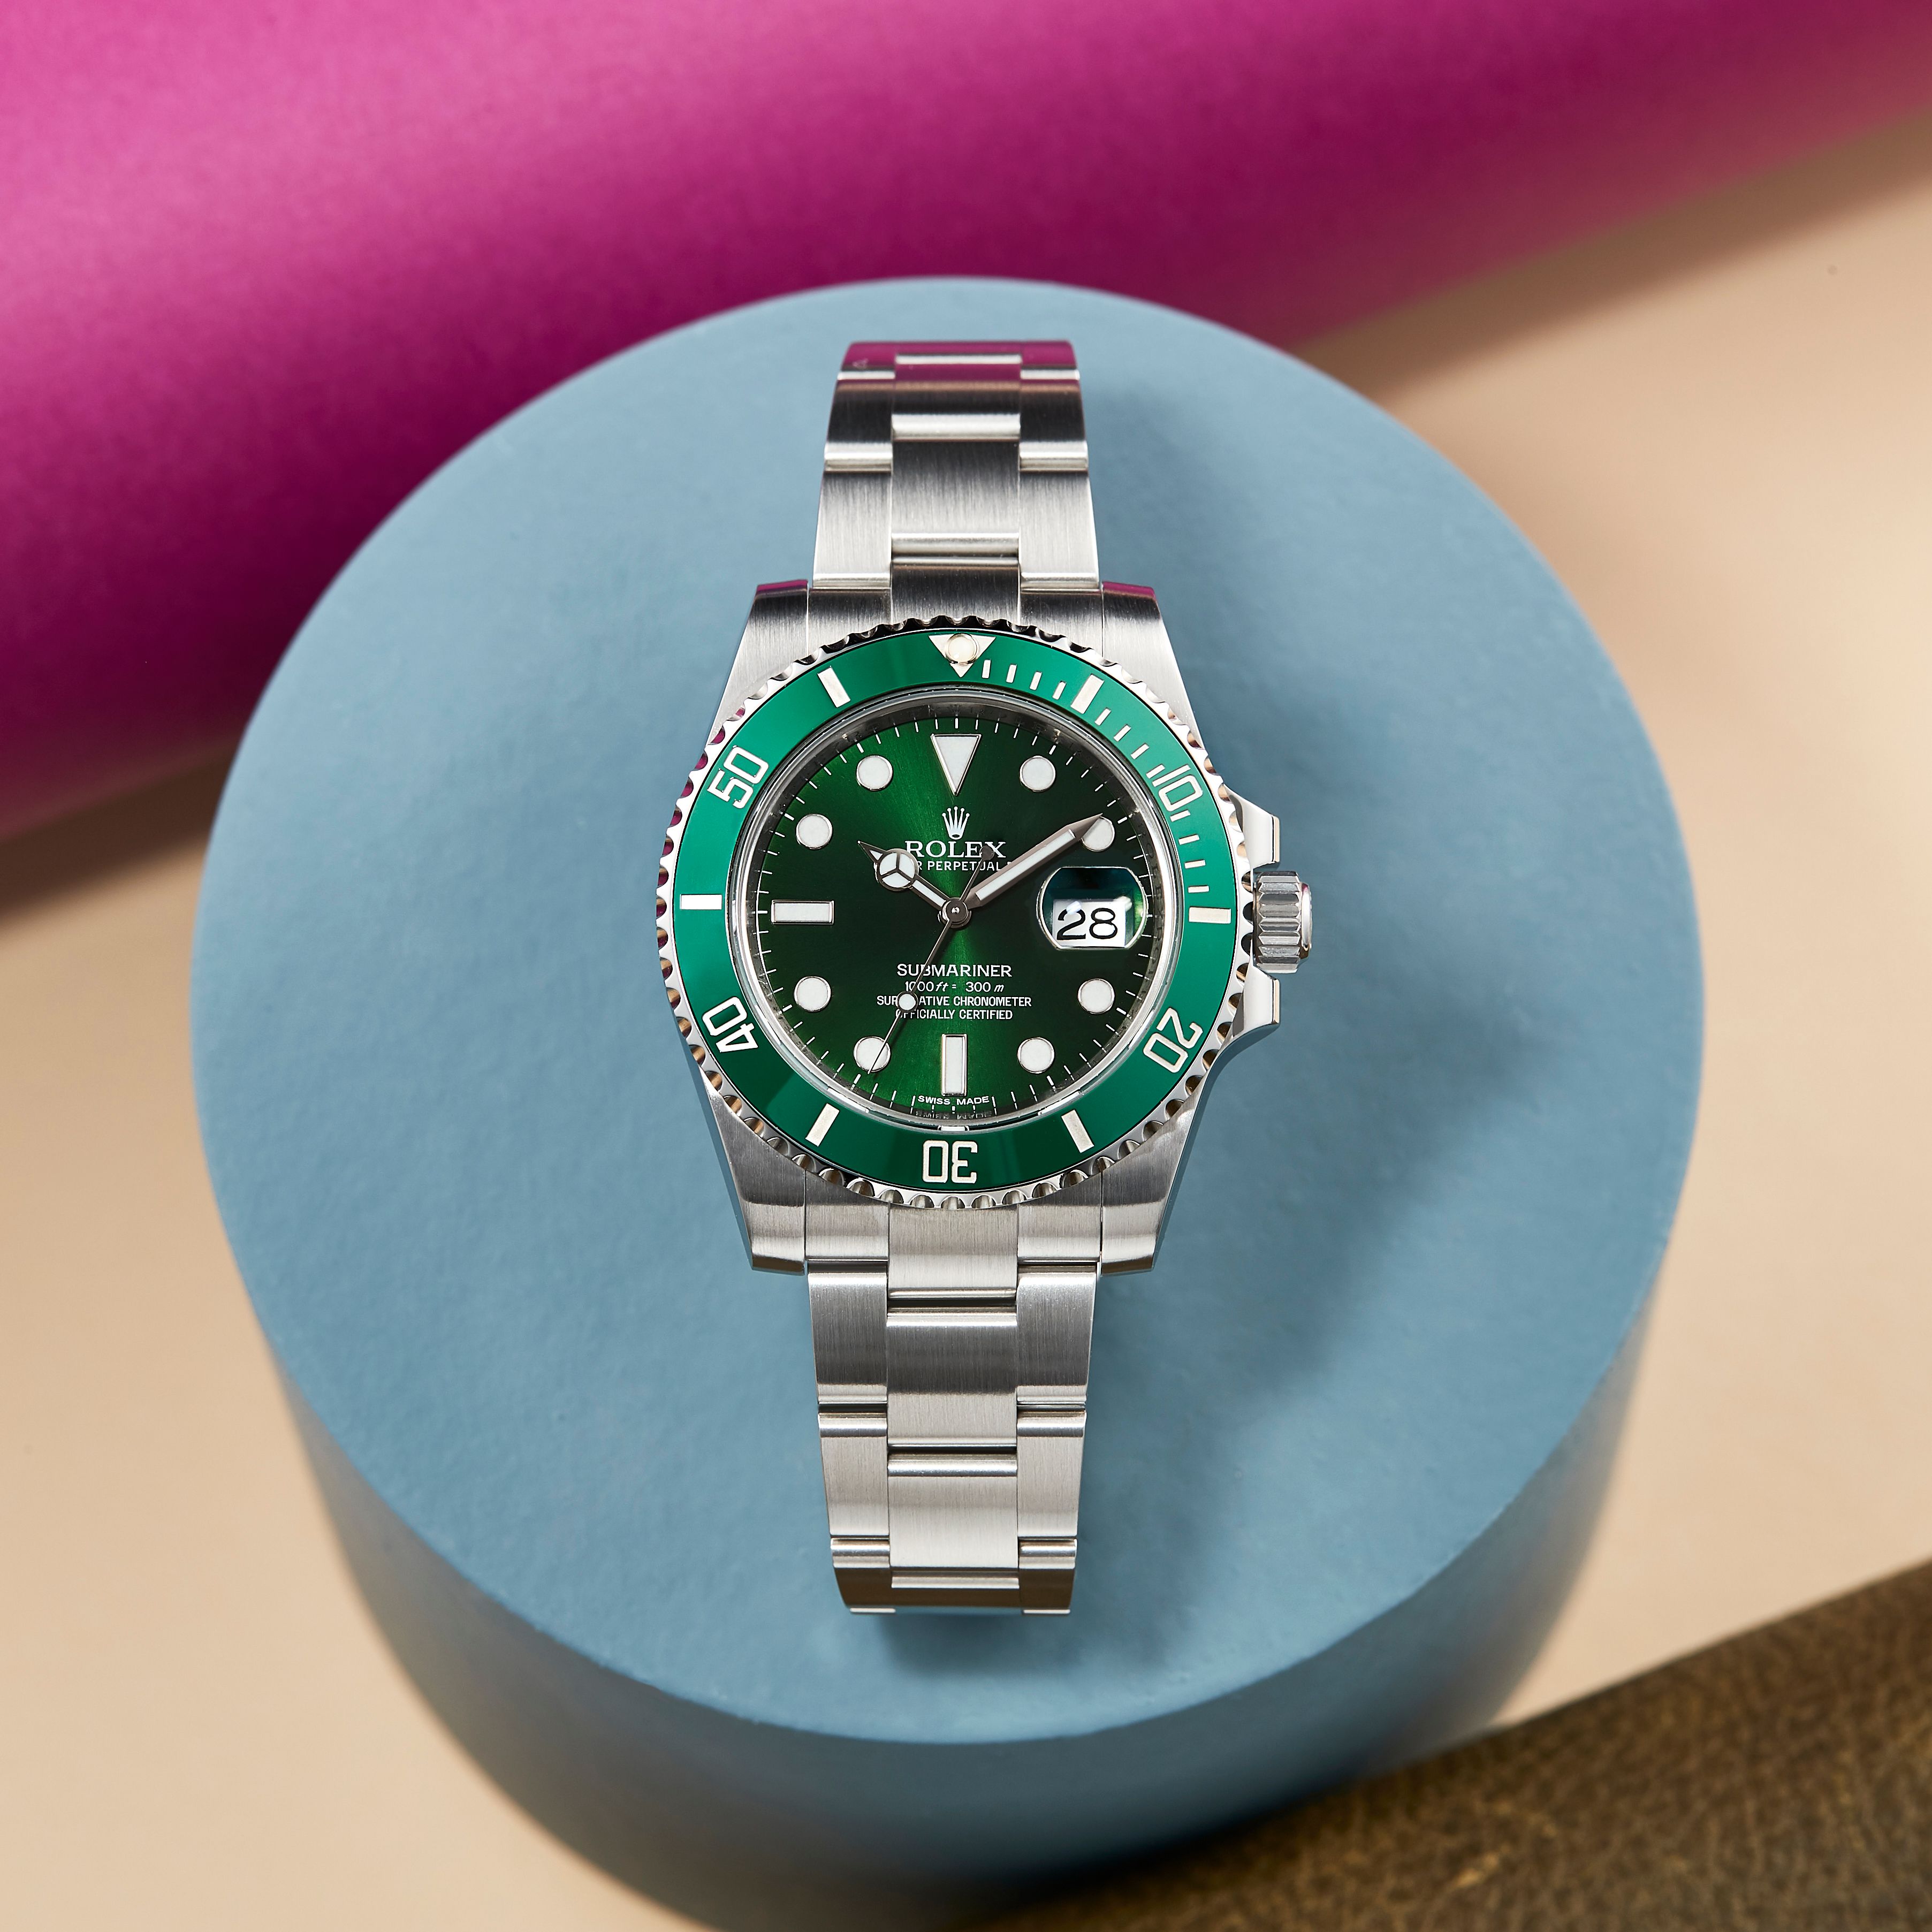 Rolex Submariner Date 116610LV Hulk 2019 Green Dial Discontinued